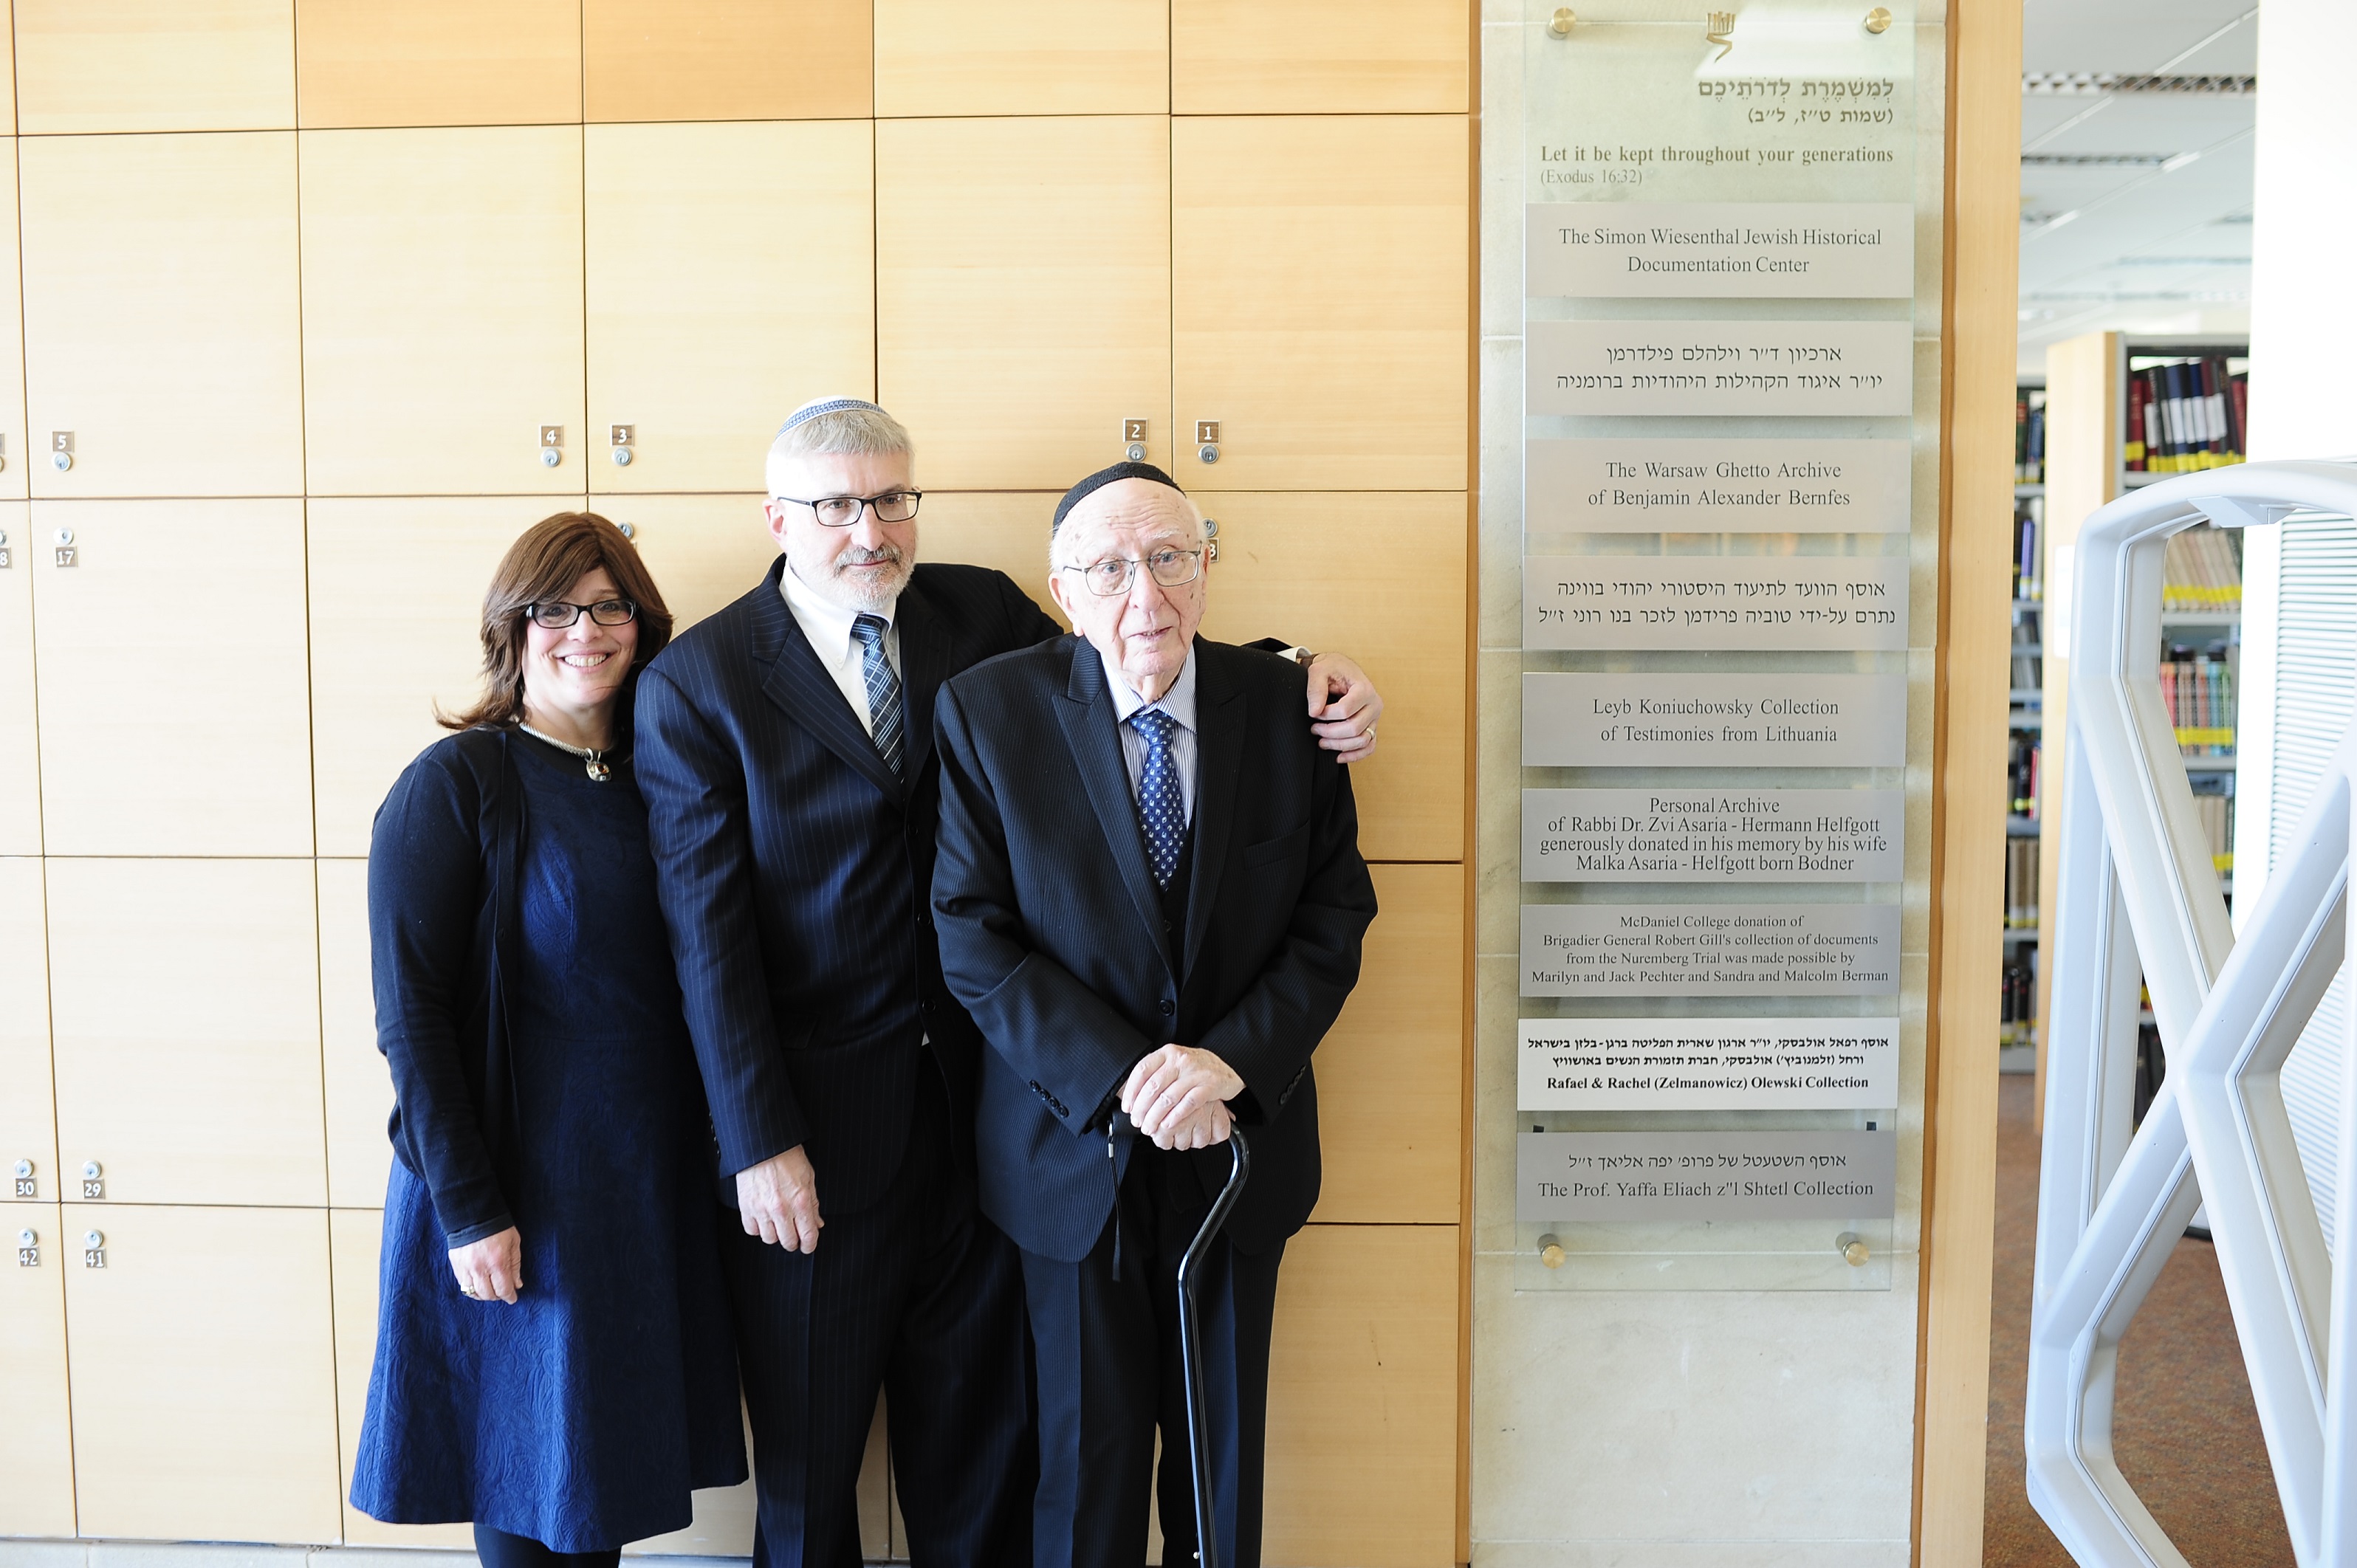 Rabbi Dr. David Eliach, joined by his son Yotav Eliach and daughter Smadar Rosensweig to unveil the plaque marking the donation of the private collection, The Prof. Yaffa Eliach z'"l Shtetl Collection to the Yad Vashem Archives